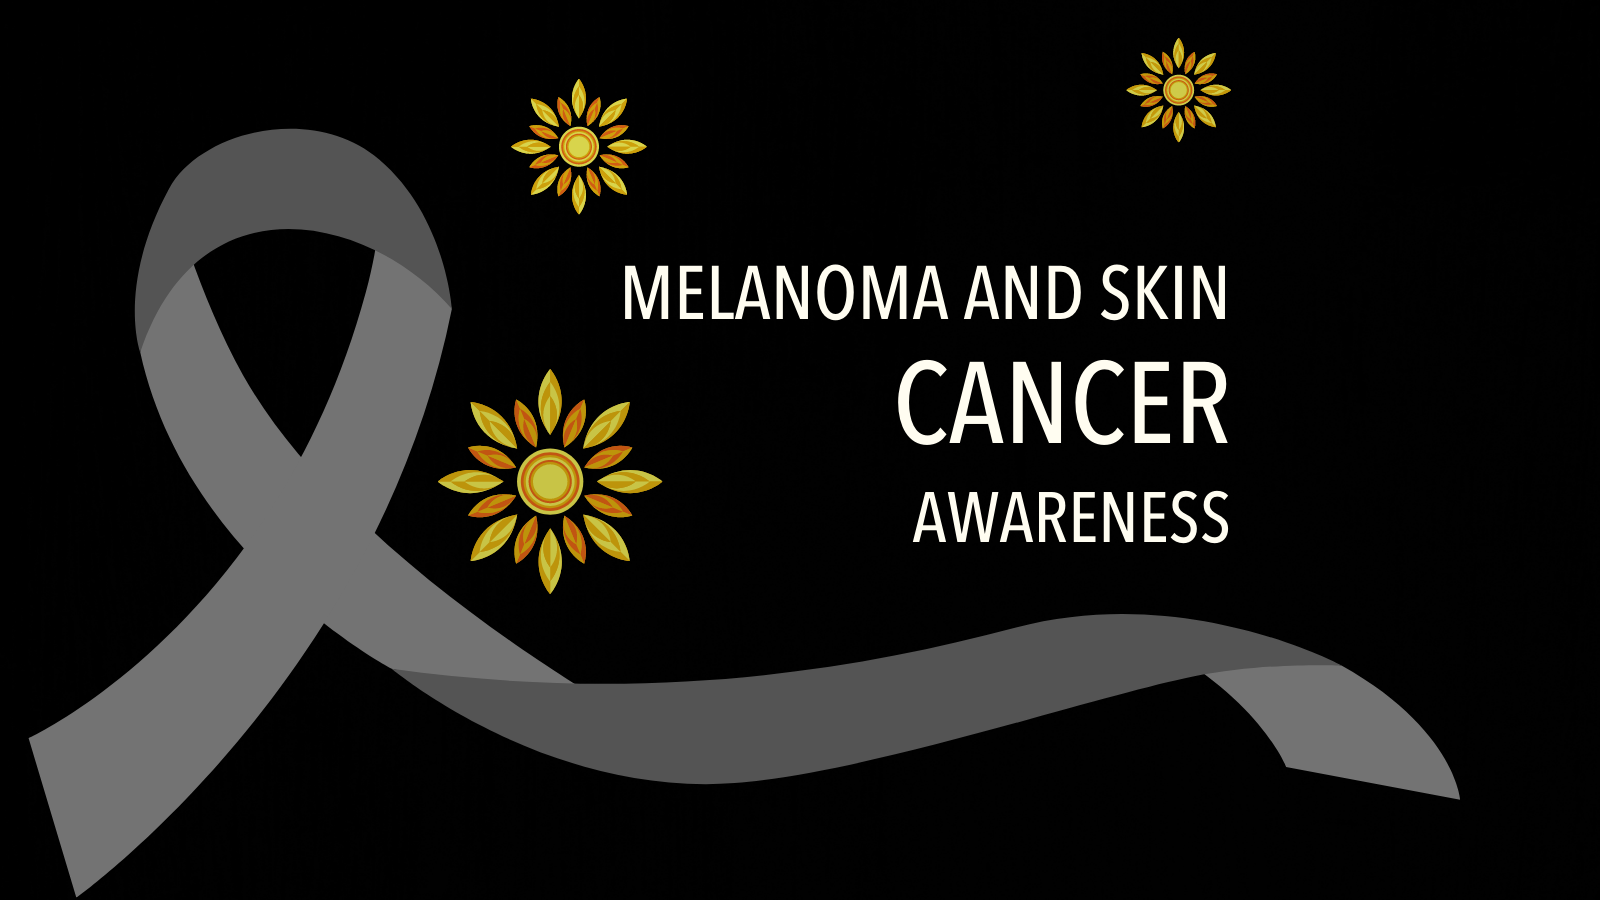 Image of black cancer ribbon and small sun stars on black background. Text reads Melanoma and Skin Cancer Awareness